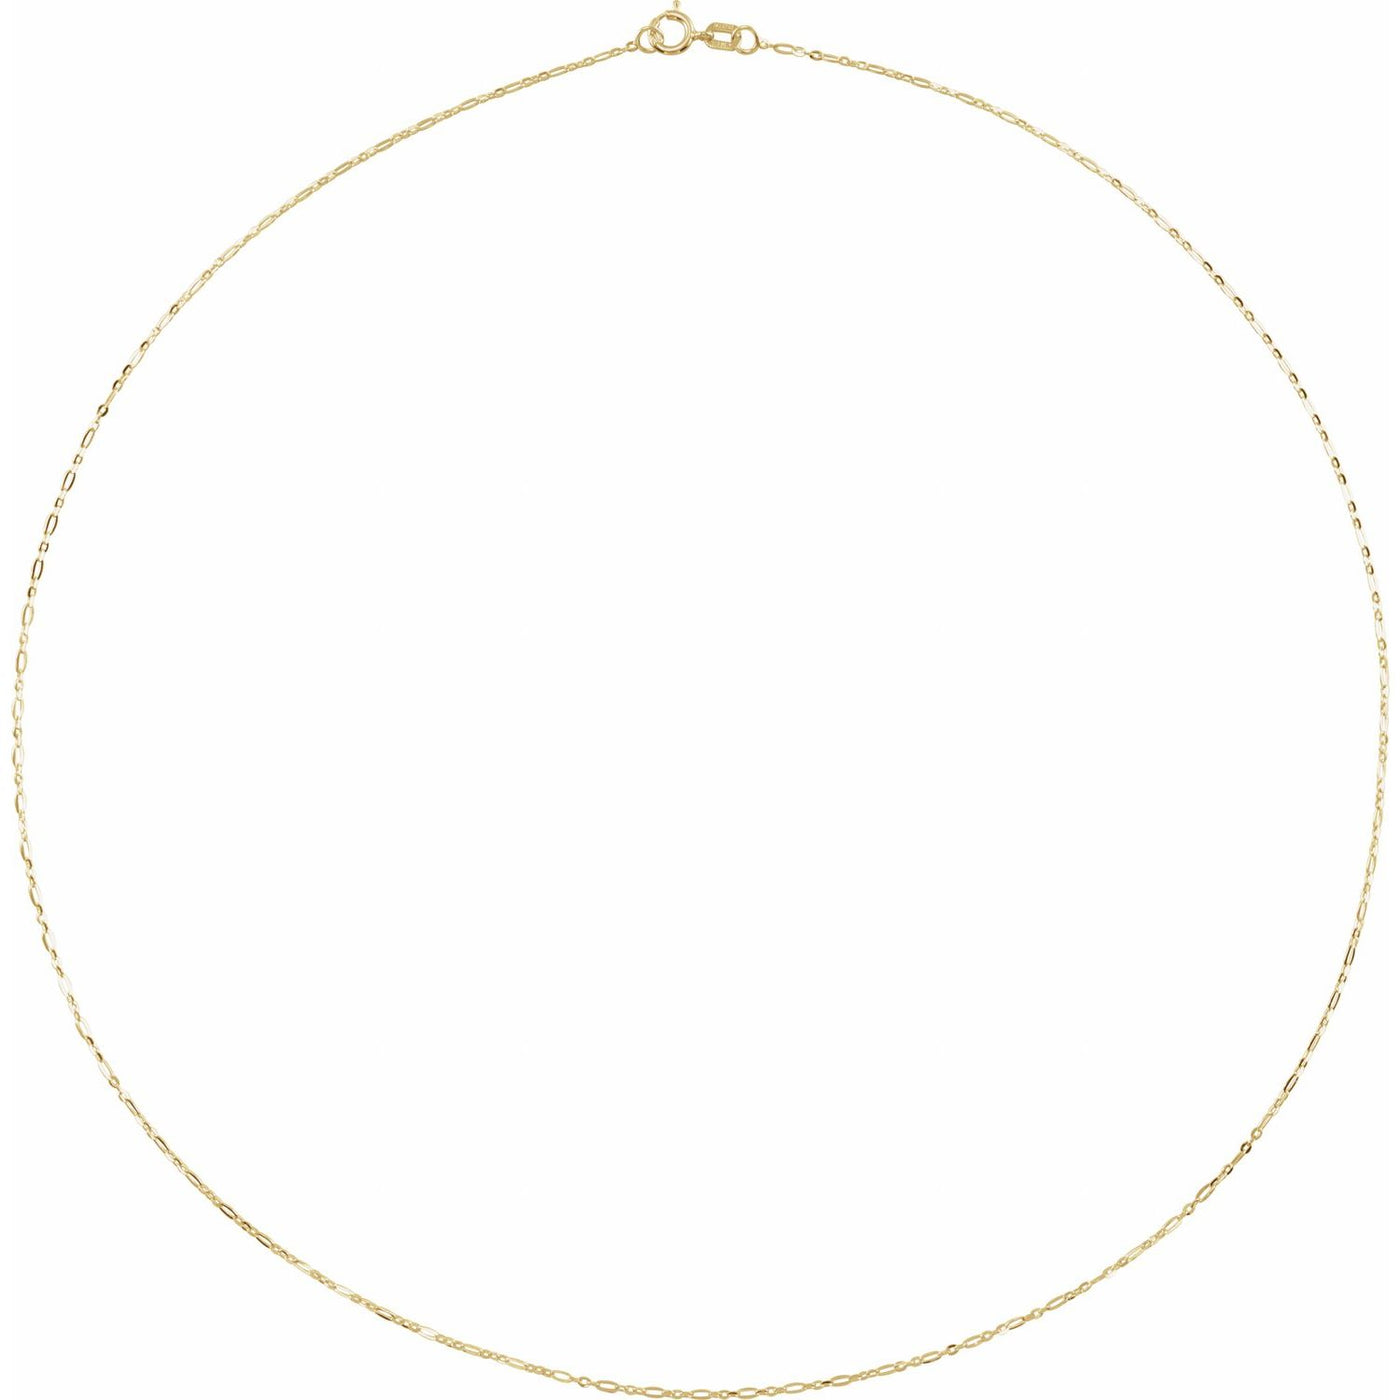 14k Gold 1.5mm Figaro Chain Necklace